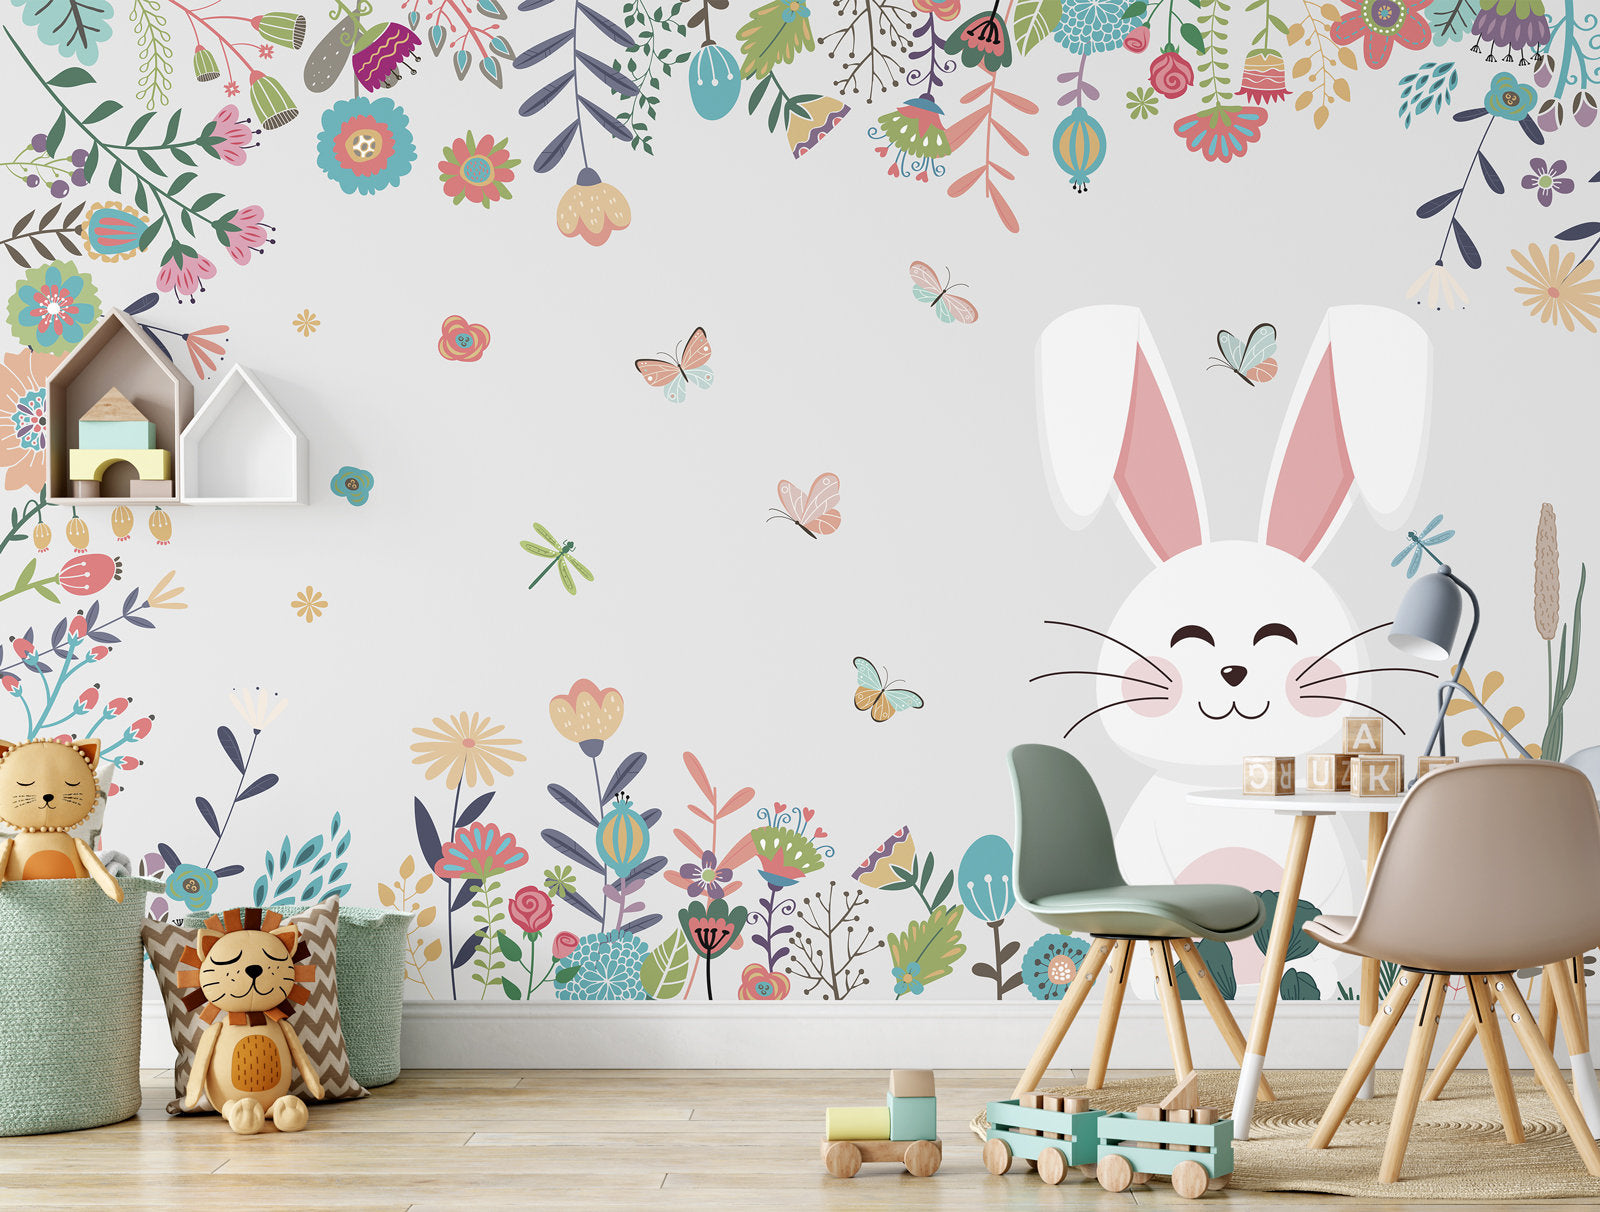 Cute Rabbit Colorful Garden Flowers Kids Room Nursery Wallpaper Self Adhesive Peel and Stick Wall Sticker All Scales Removable